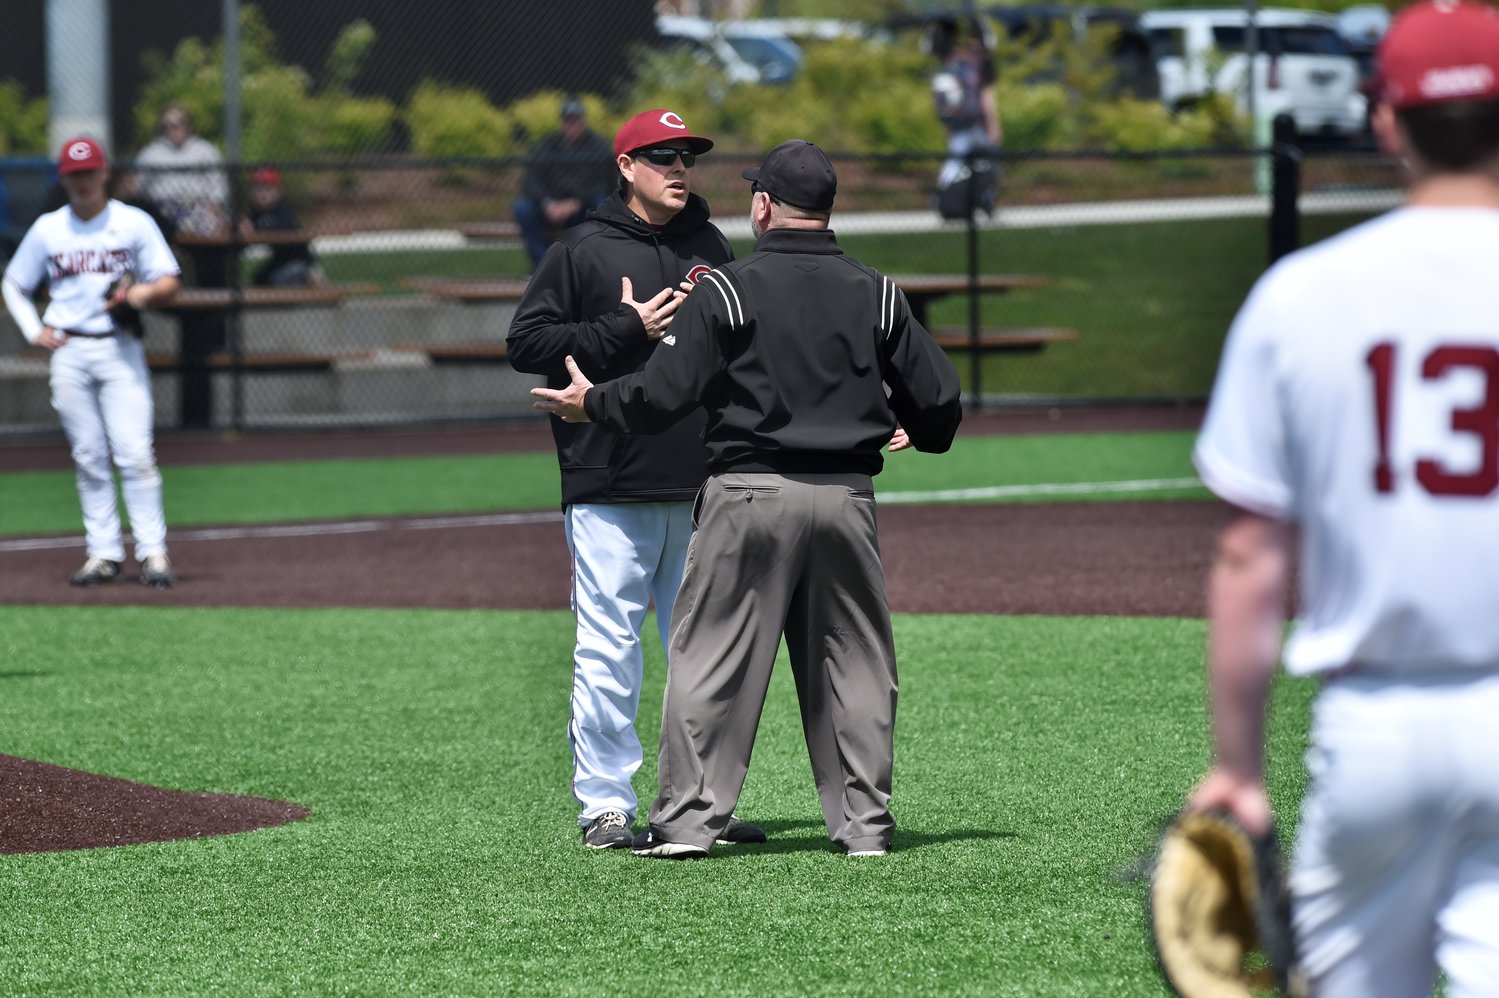 W.F. West coach Bryan Bullock argues a balk call but gets nowhere with the umpire in the fifth inning against Mark Morris in the 2A District 4 tournament May 14 in Ridgefield.